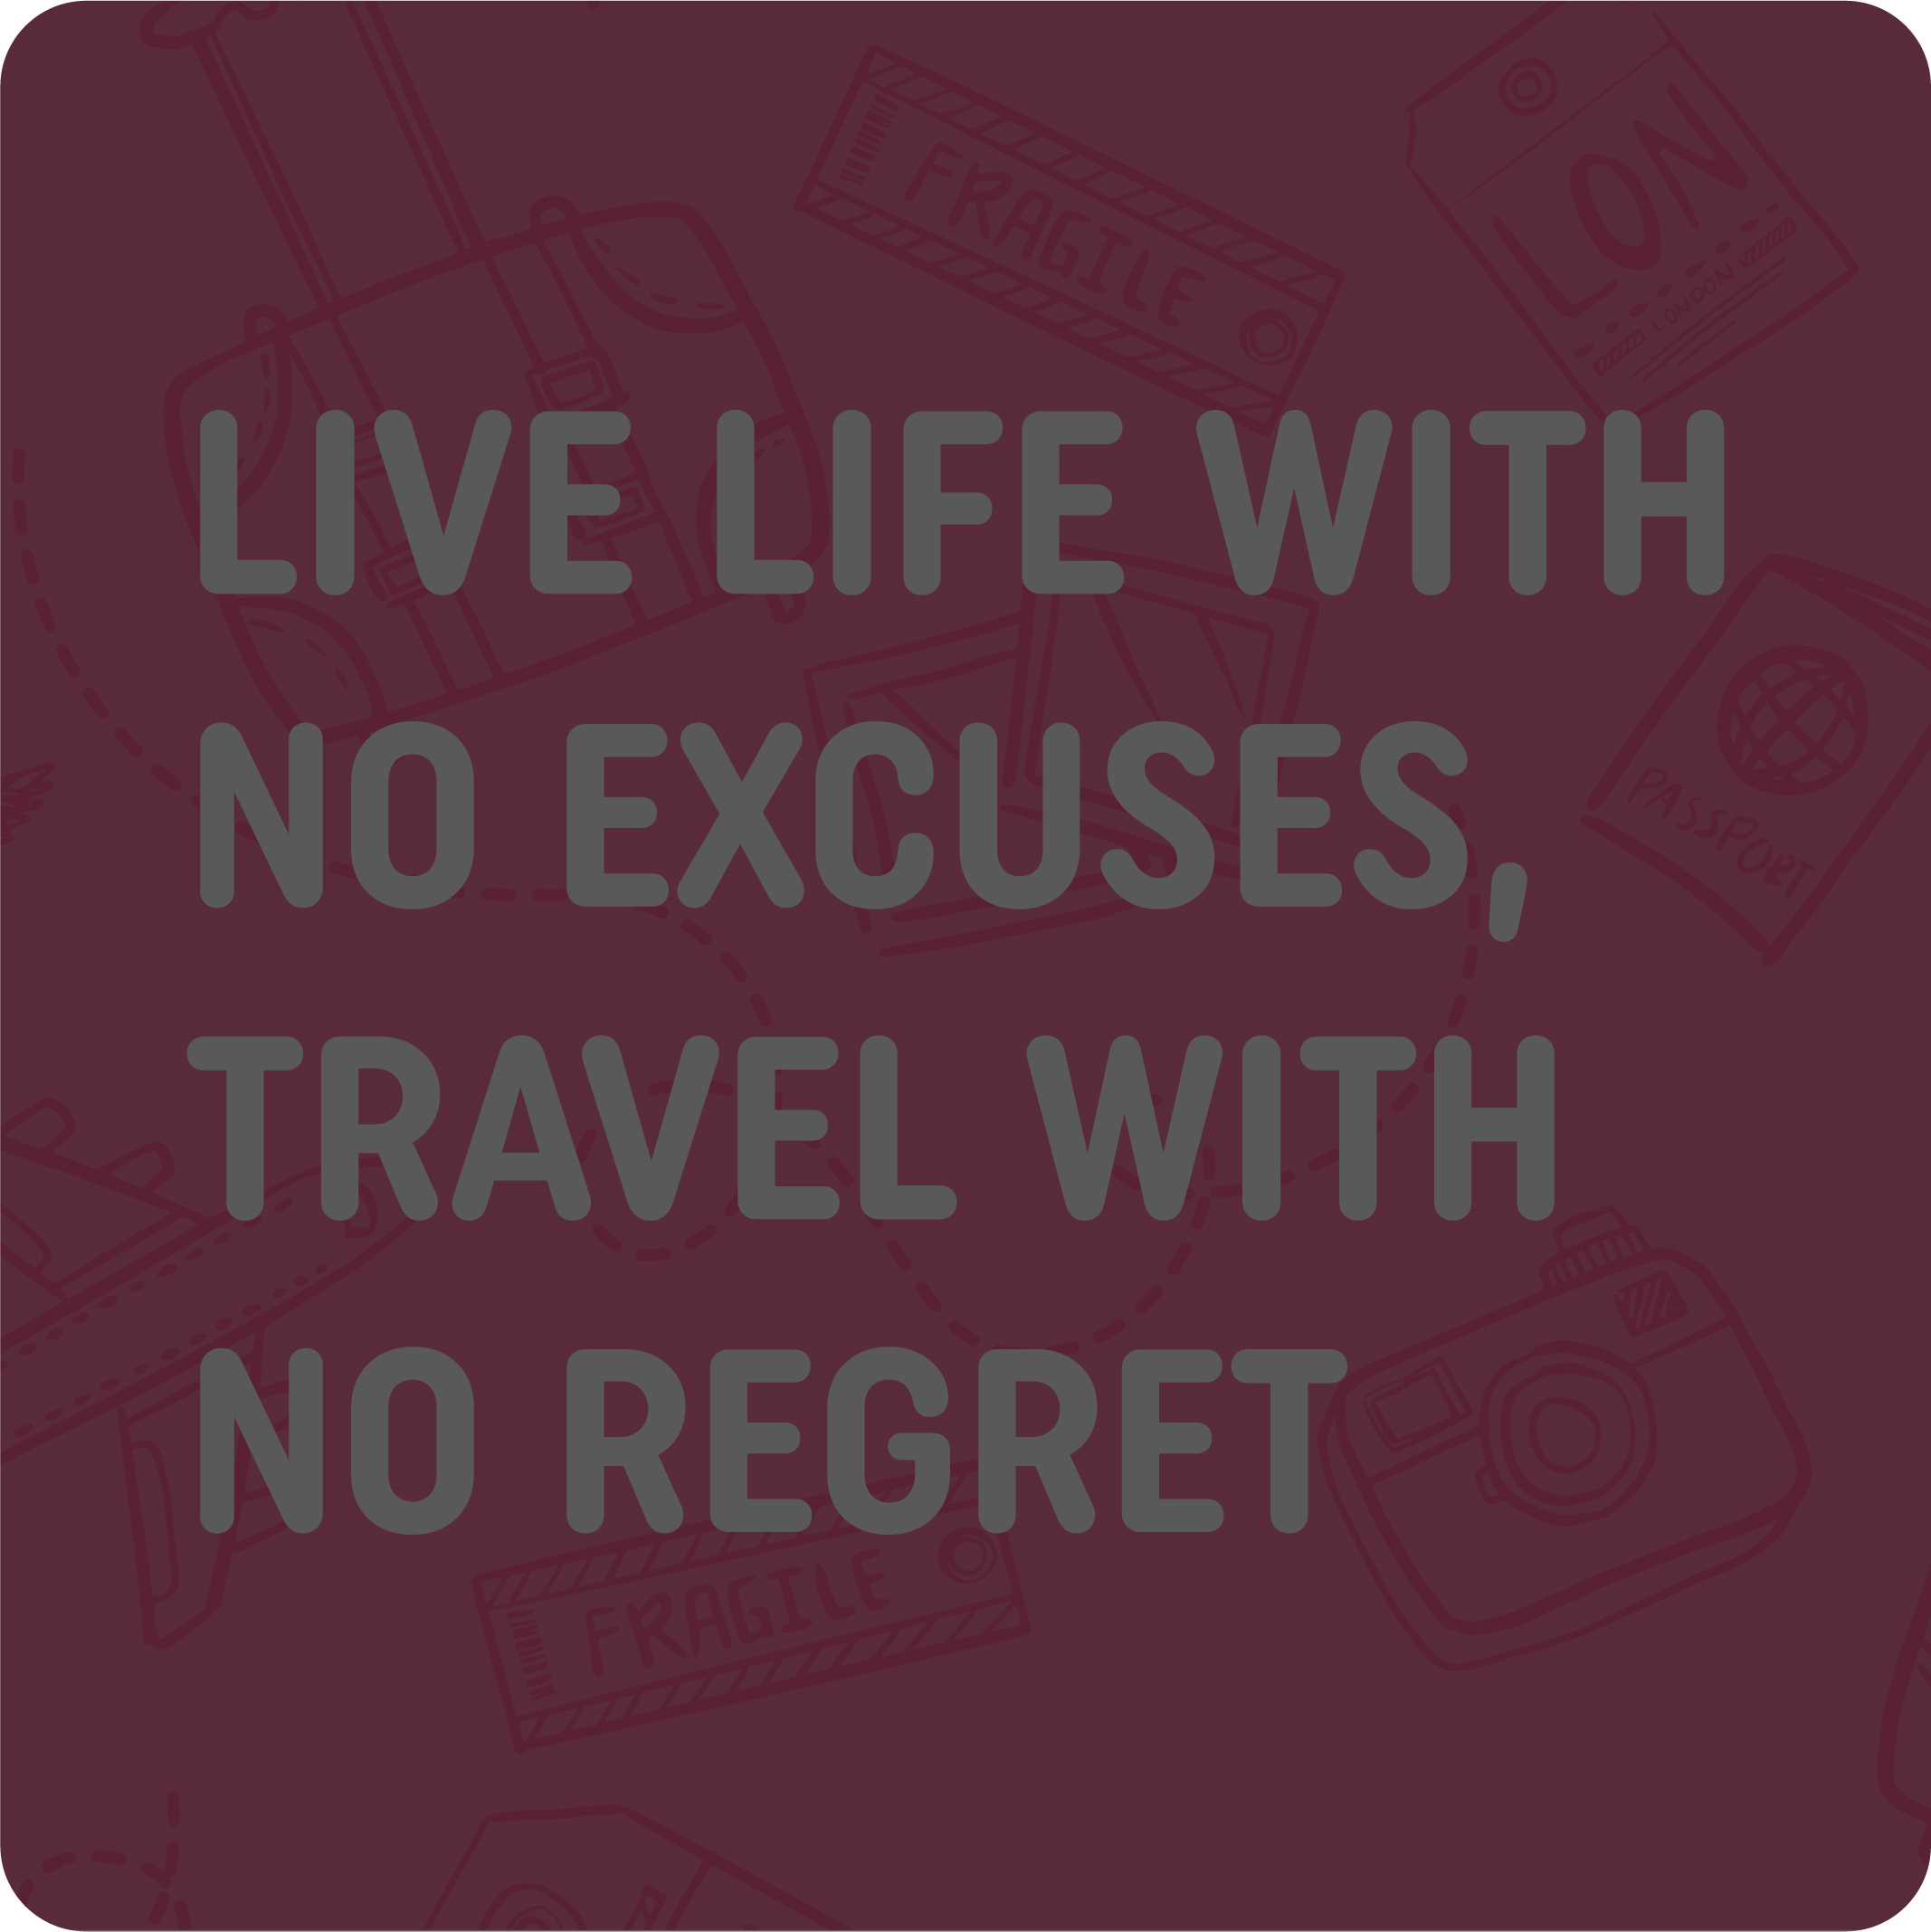 TRAVEL WITH NO REGRET !